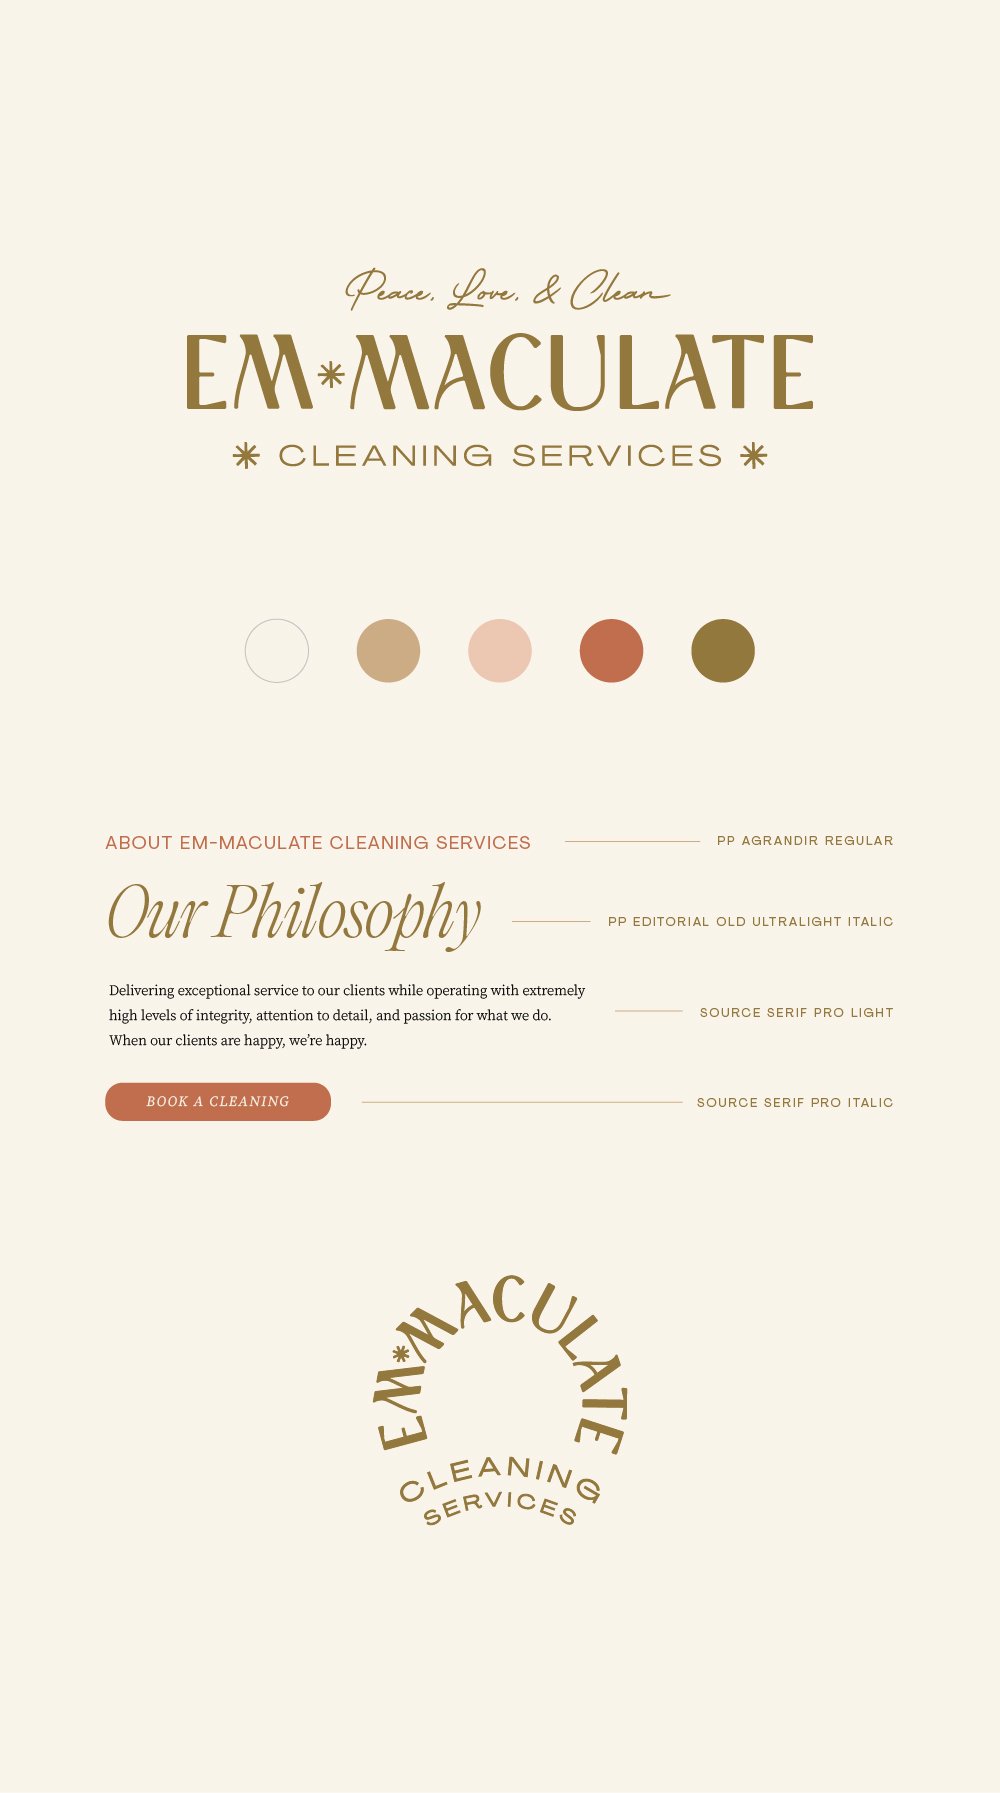 Boutique cleaning company brand design by perspektiiv design co.jpg